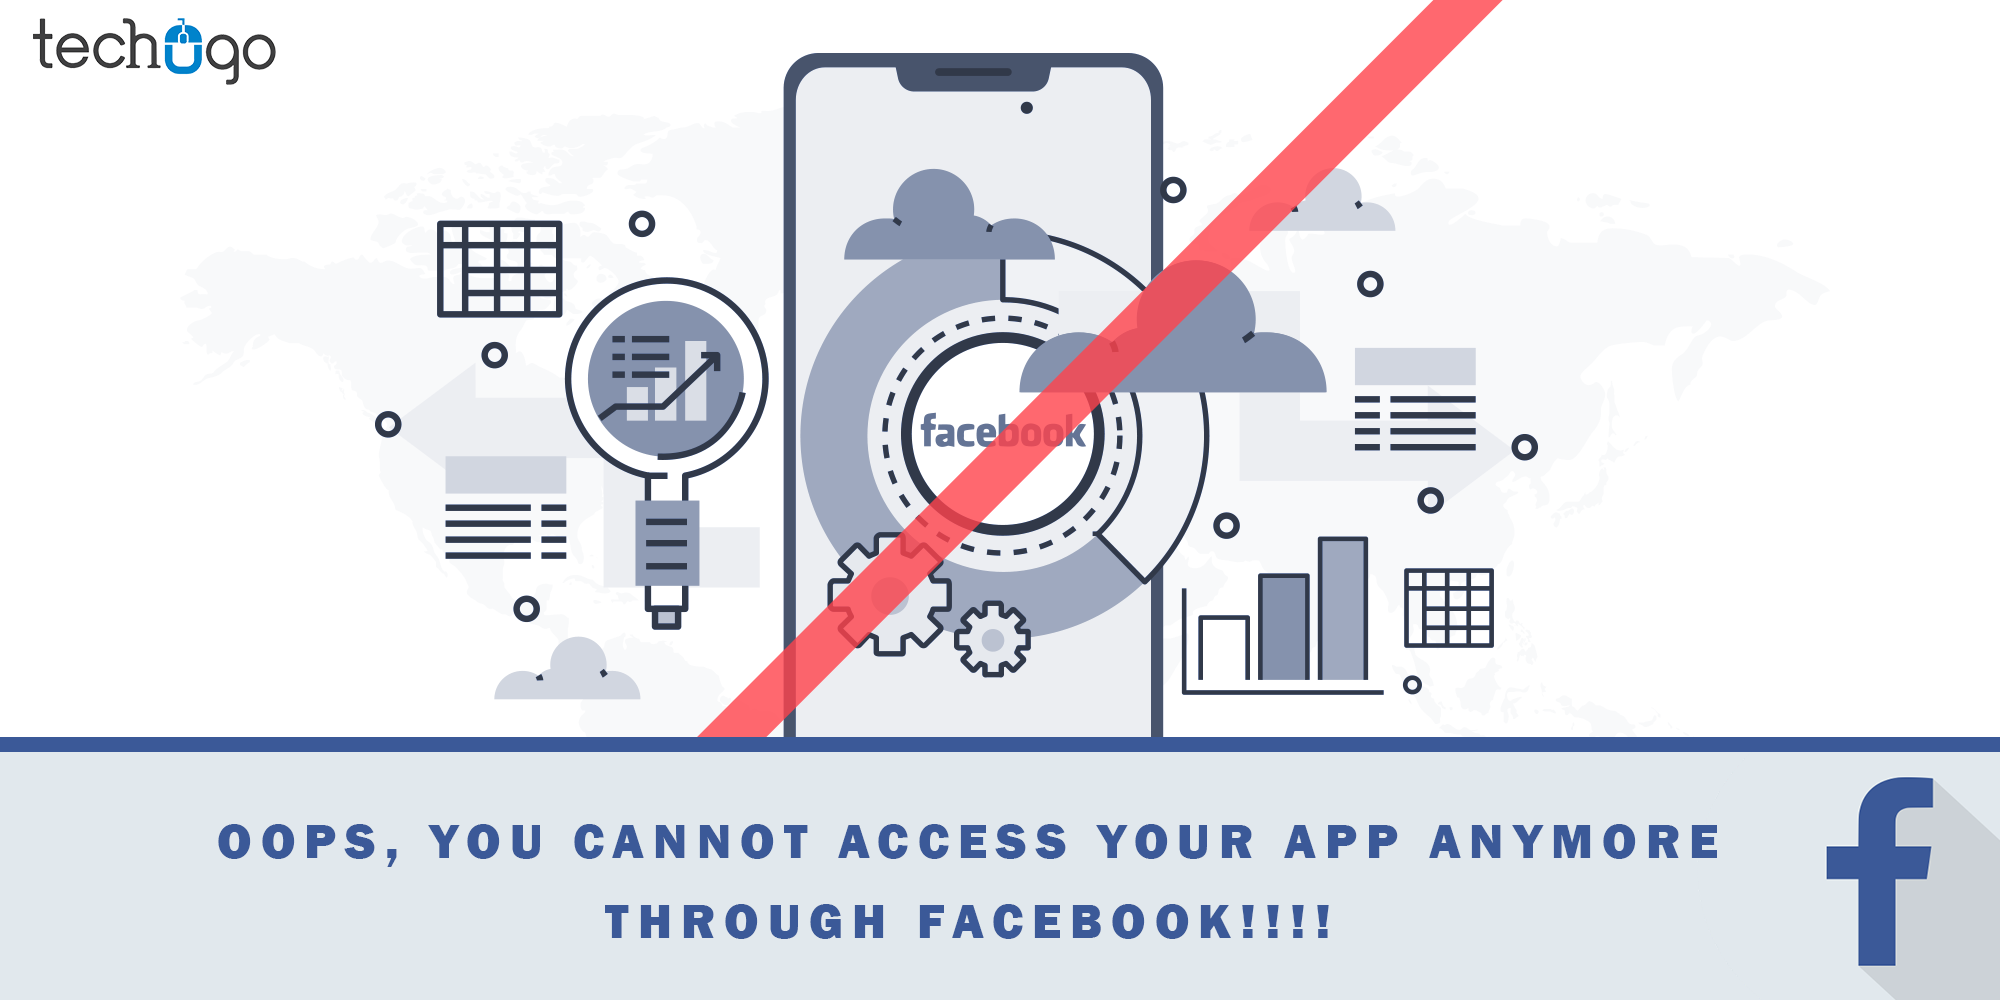 Oops, You Cannot Access Your App Anymore Through Facebook